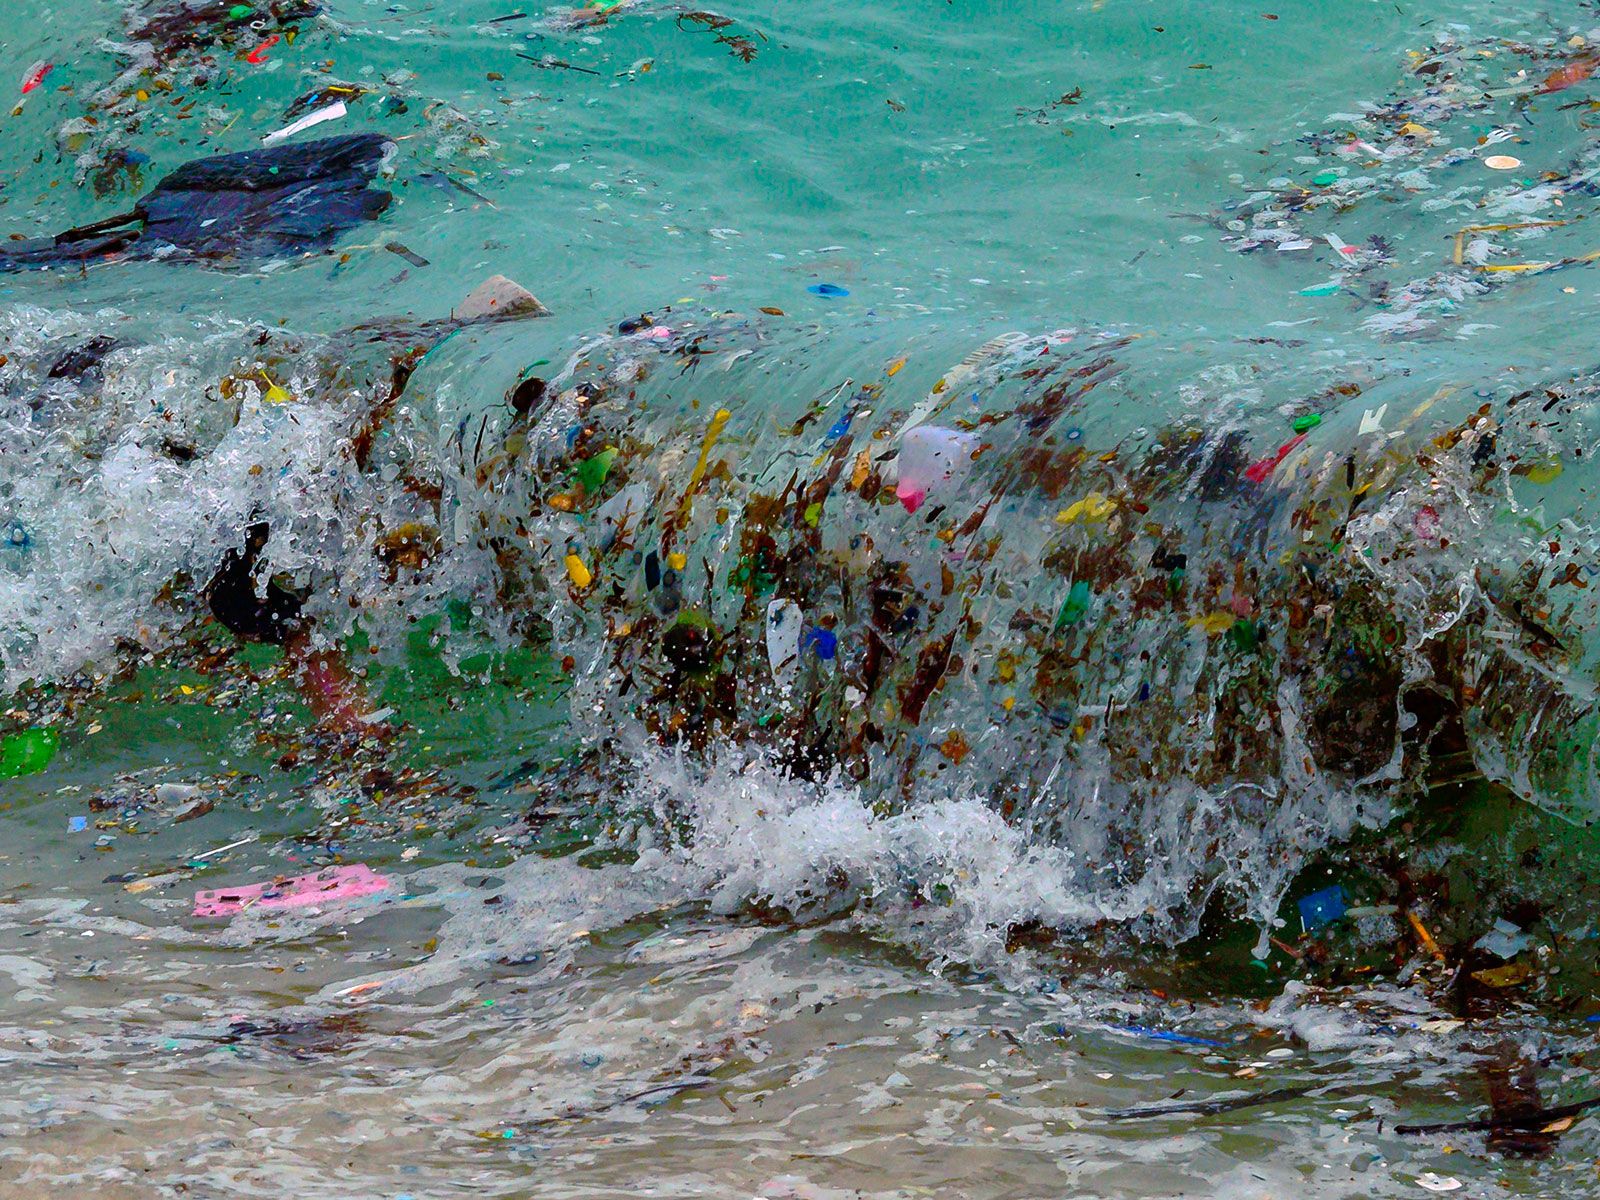 Human Pathogens Are Hitching a Journey on Floating Plastic | Science